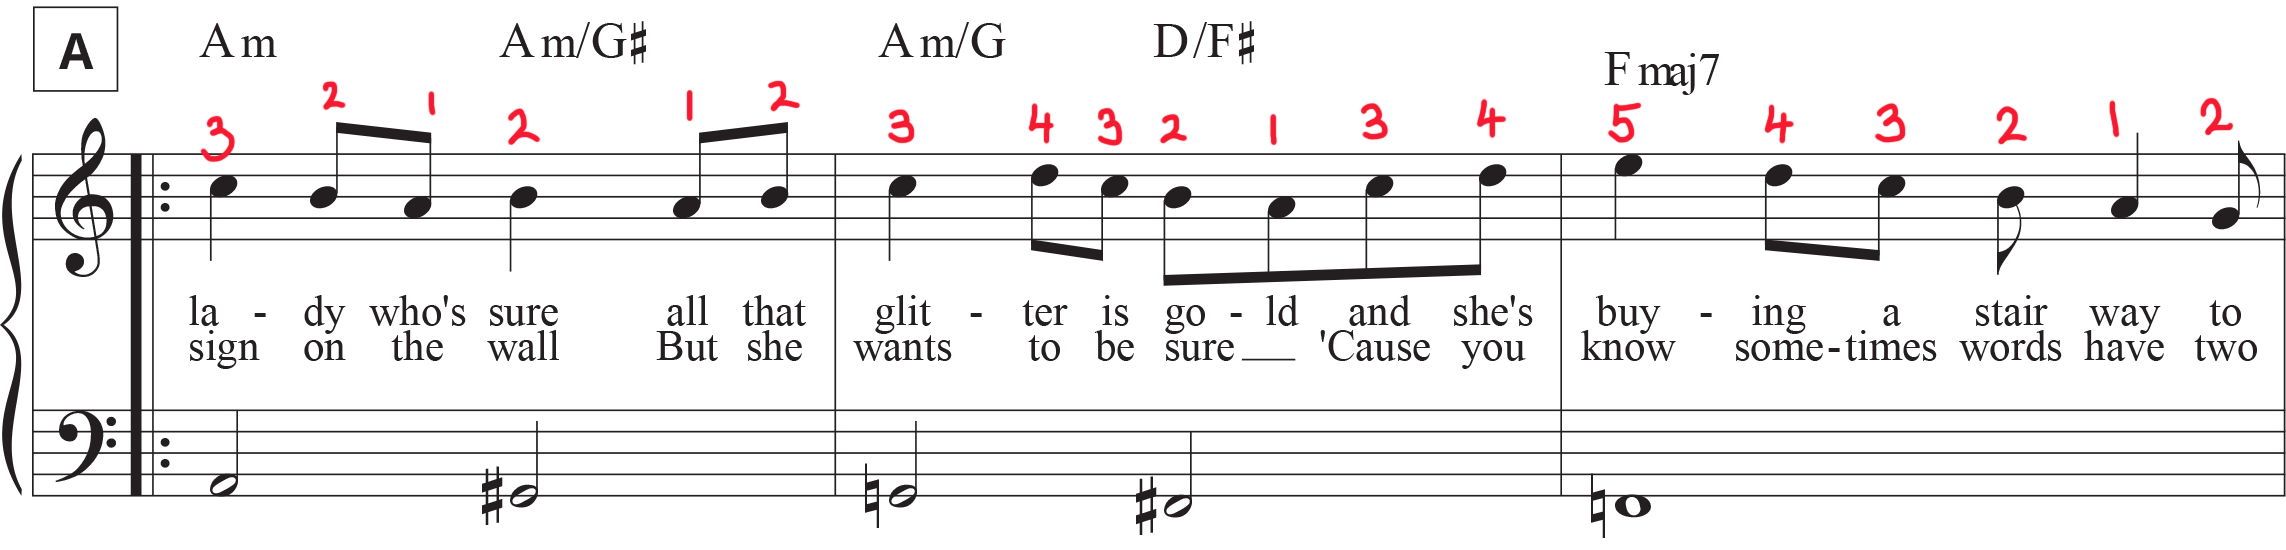 "Stairway to Heaven" sheet music mark-up of Section A with fingering in right hand.